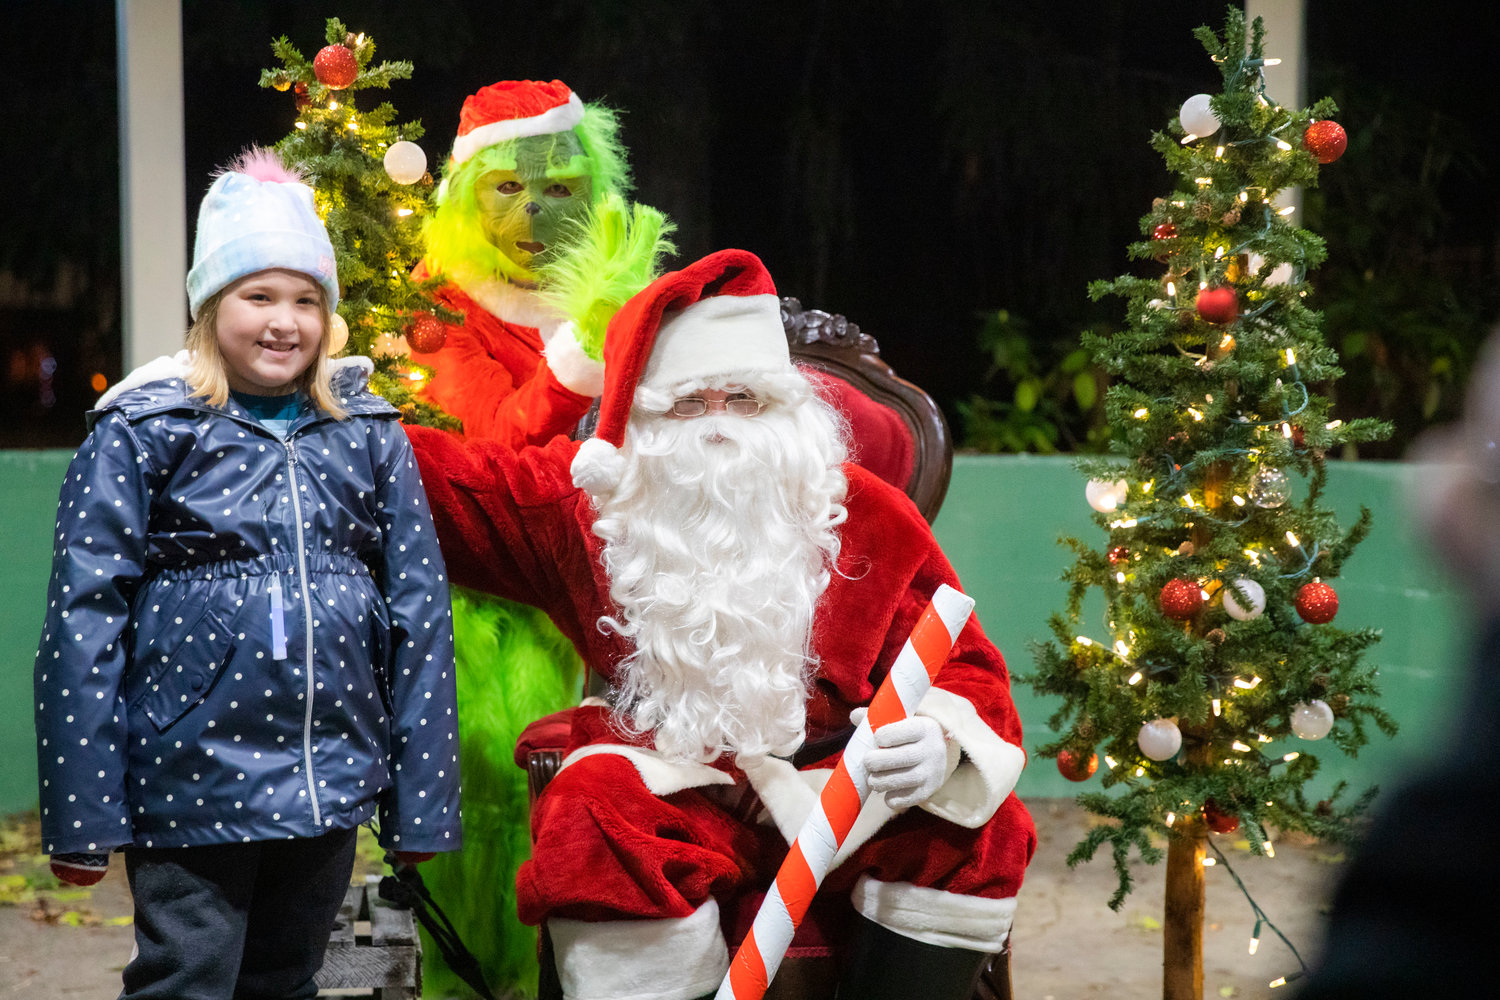 Santa and the Grinch pose for photos with kids at George Washington Park Friday night during a Christmas Tree Lighting celebration.